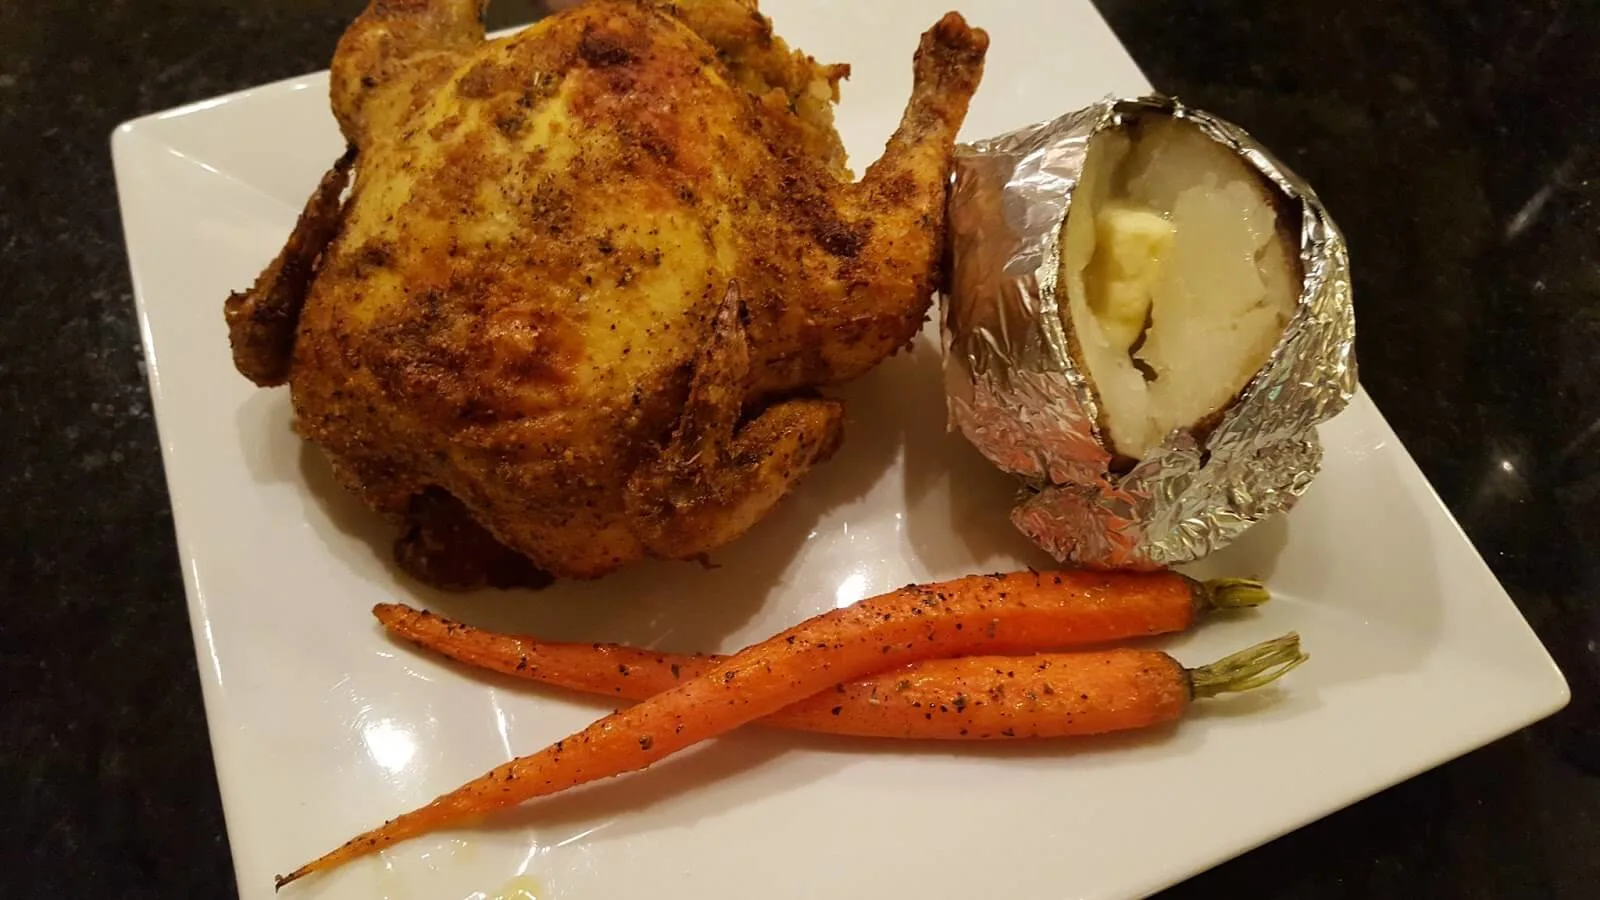 Cornish game hen with baked potato and roasted carrots